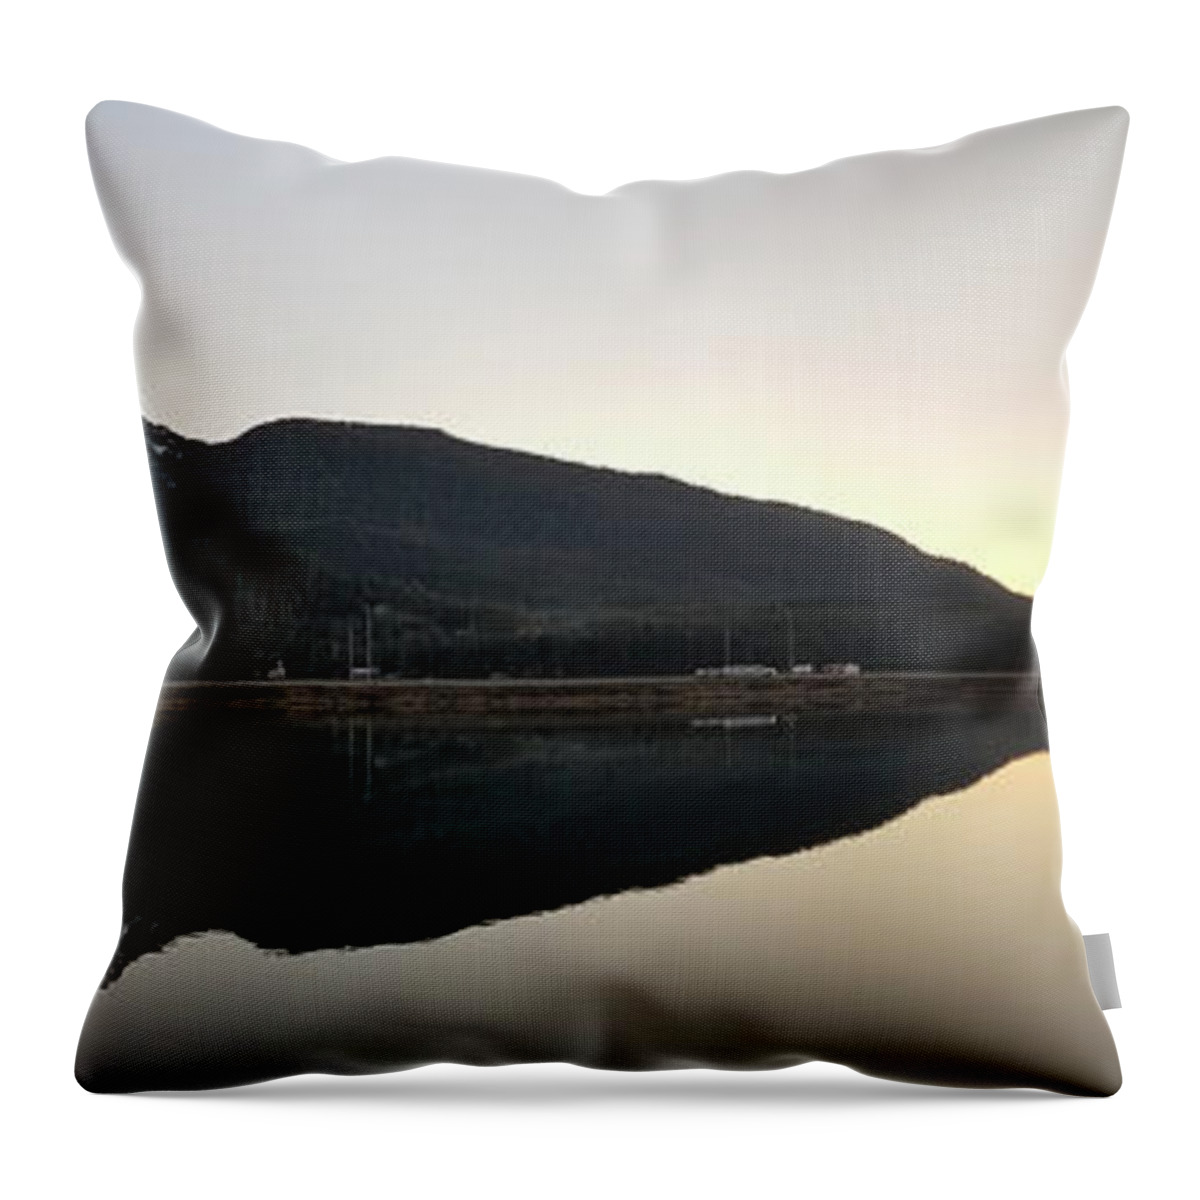 #alaska #juneau #ak #cruise #tours #vacation #peaceful #reflection #douglas #capitalcity #clearskies #postcard #evening #dusk #sunset #twinlakes #eagandrive Throw Pillow featuring the photograph Saw-Toothed Douglas by Charles Vice